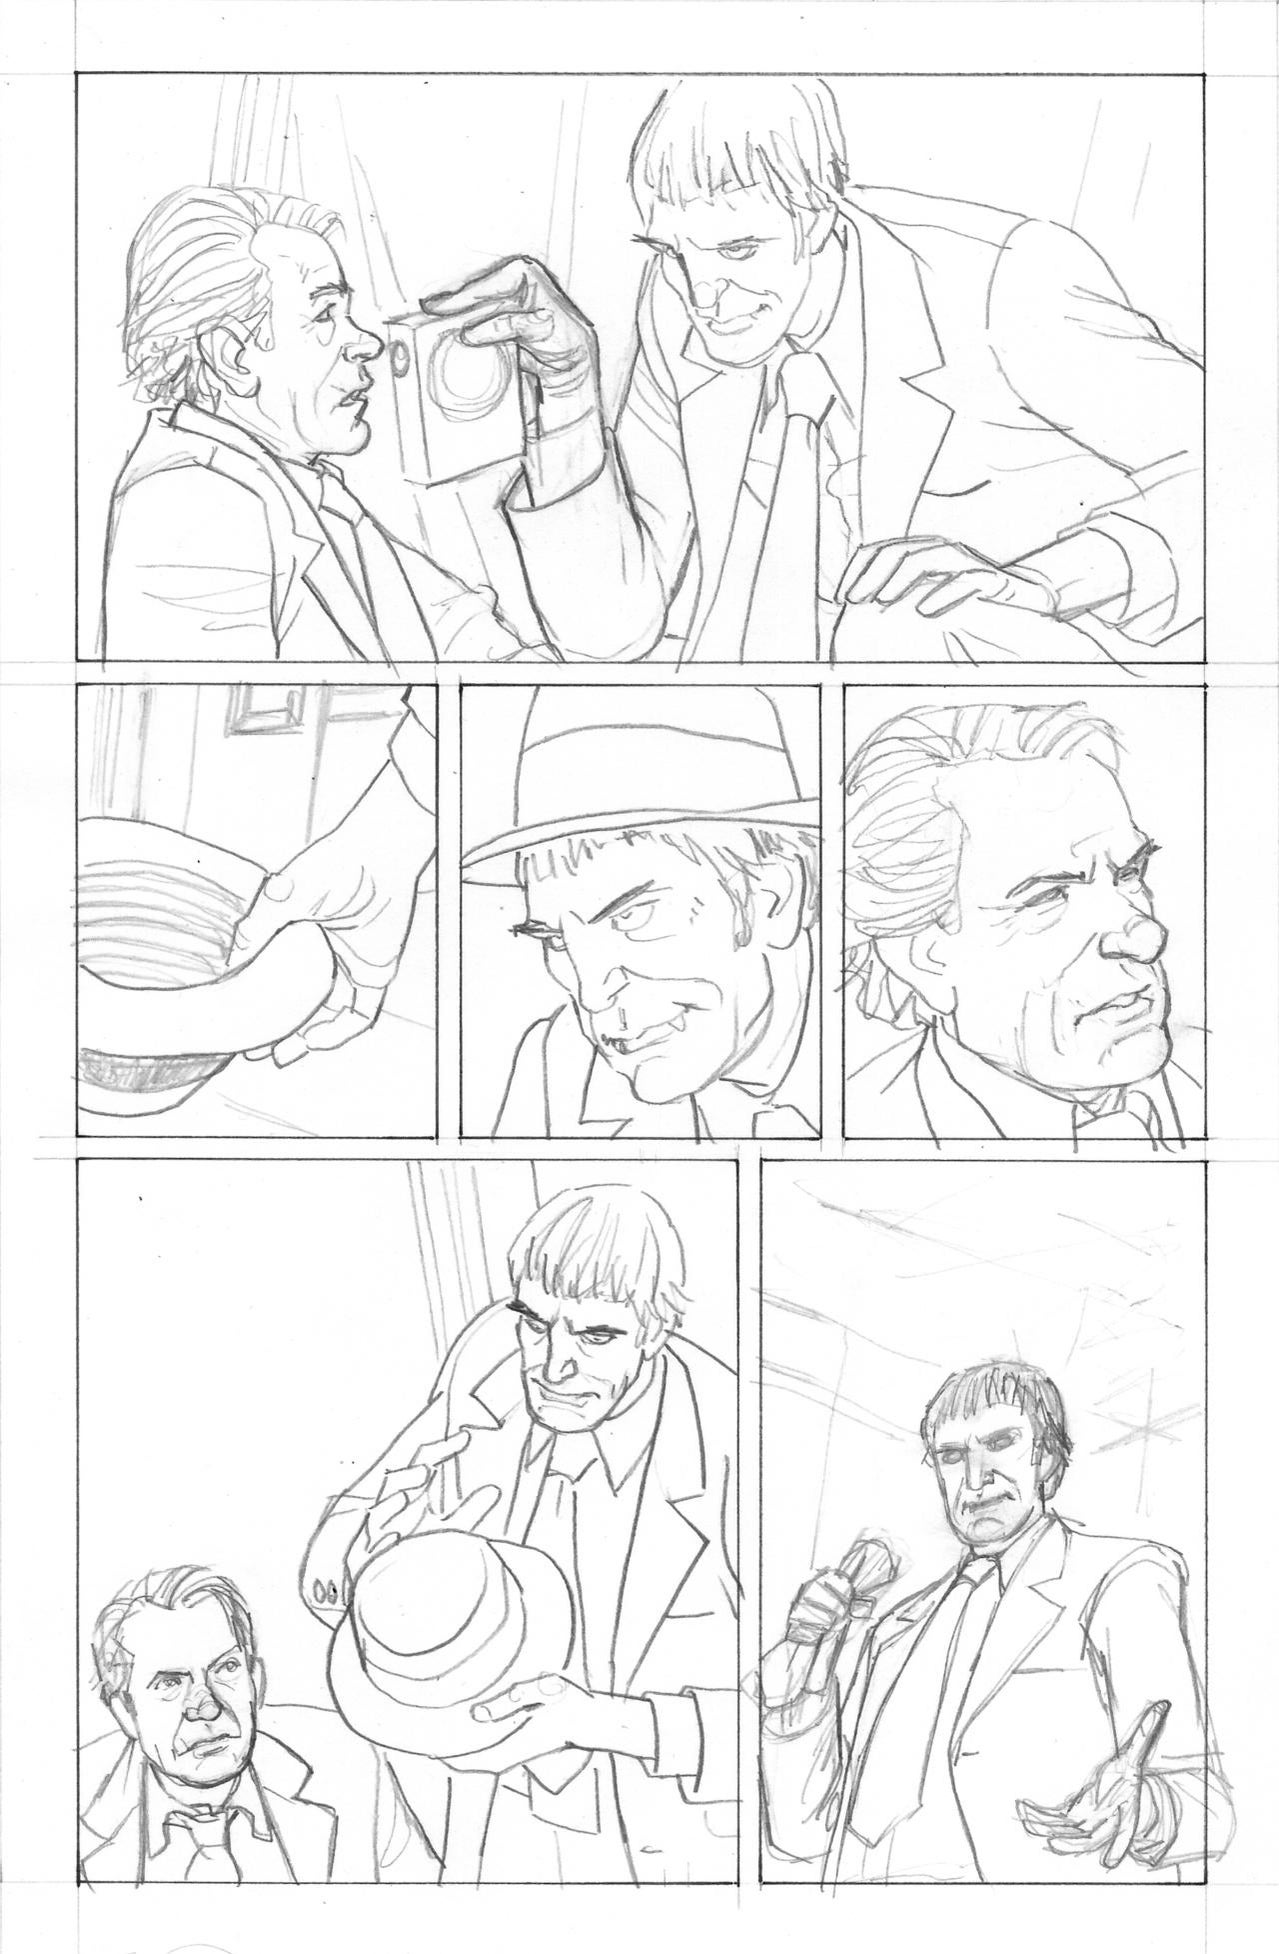 kolchak-interview-with-the-night-stalker-page-6-rough.jpg